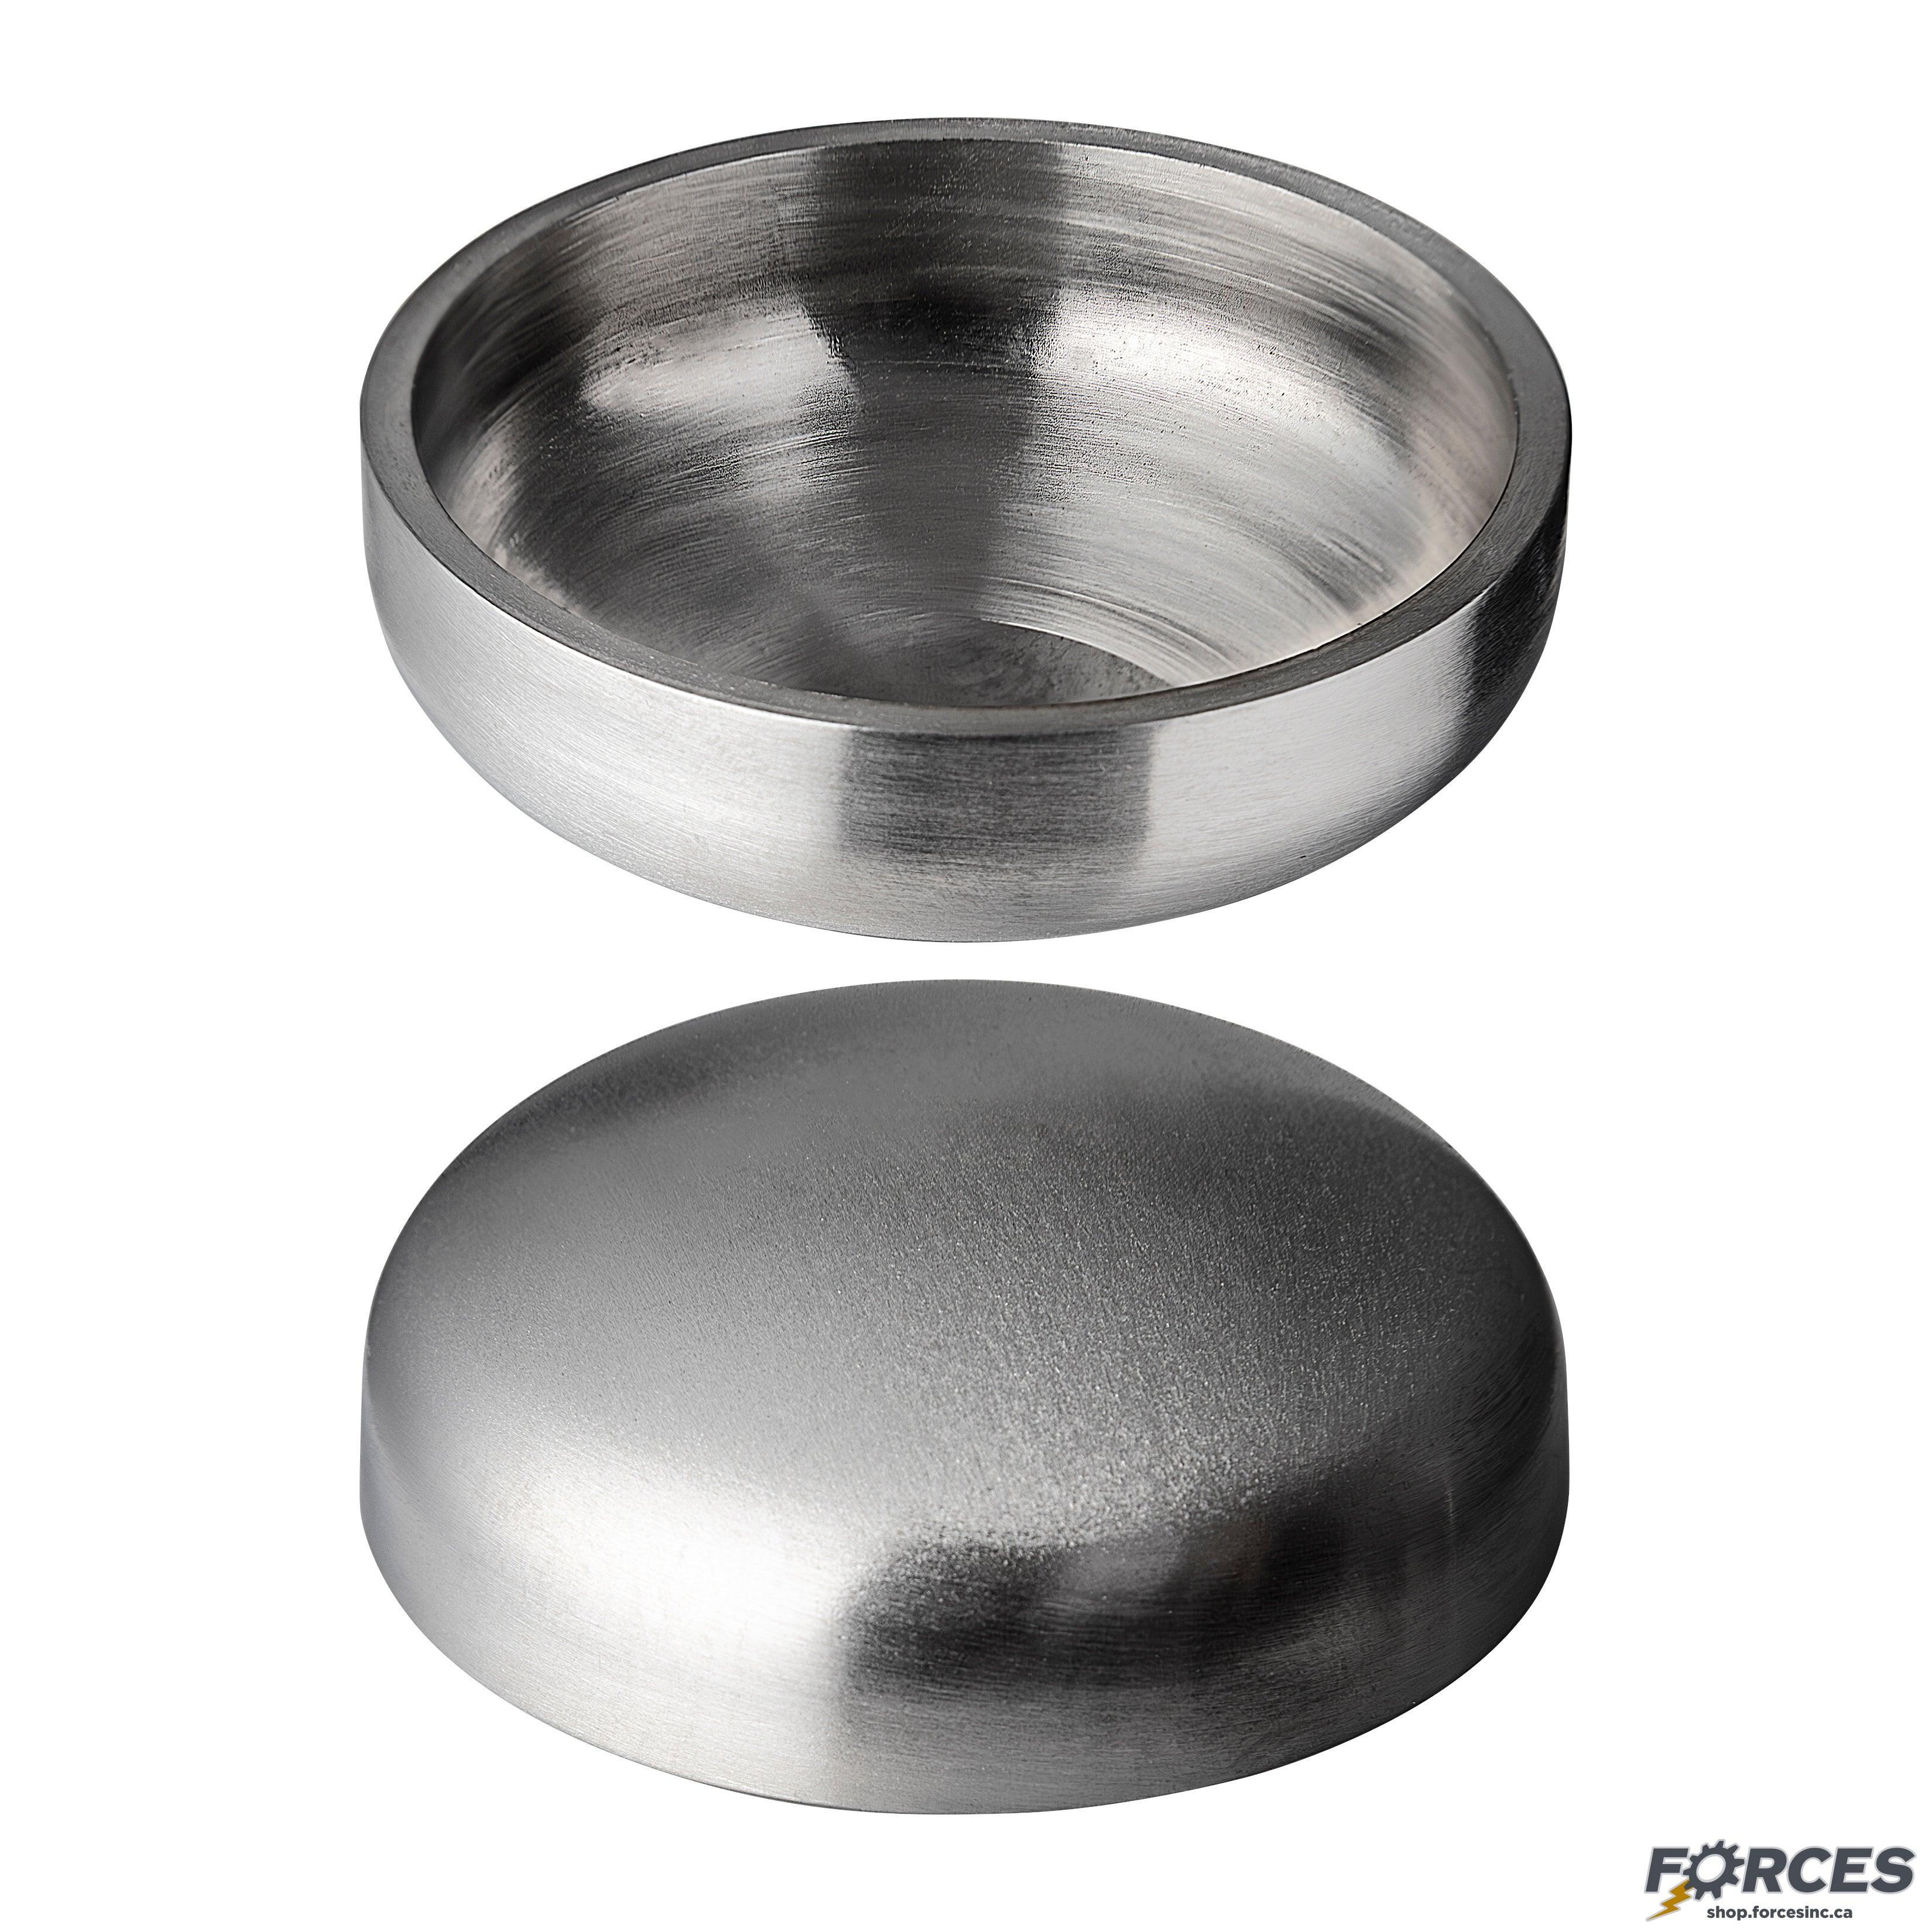 6" Butt Weld End Cap 16W - Stainless Steel 316 - Forces Inc